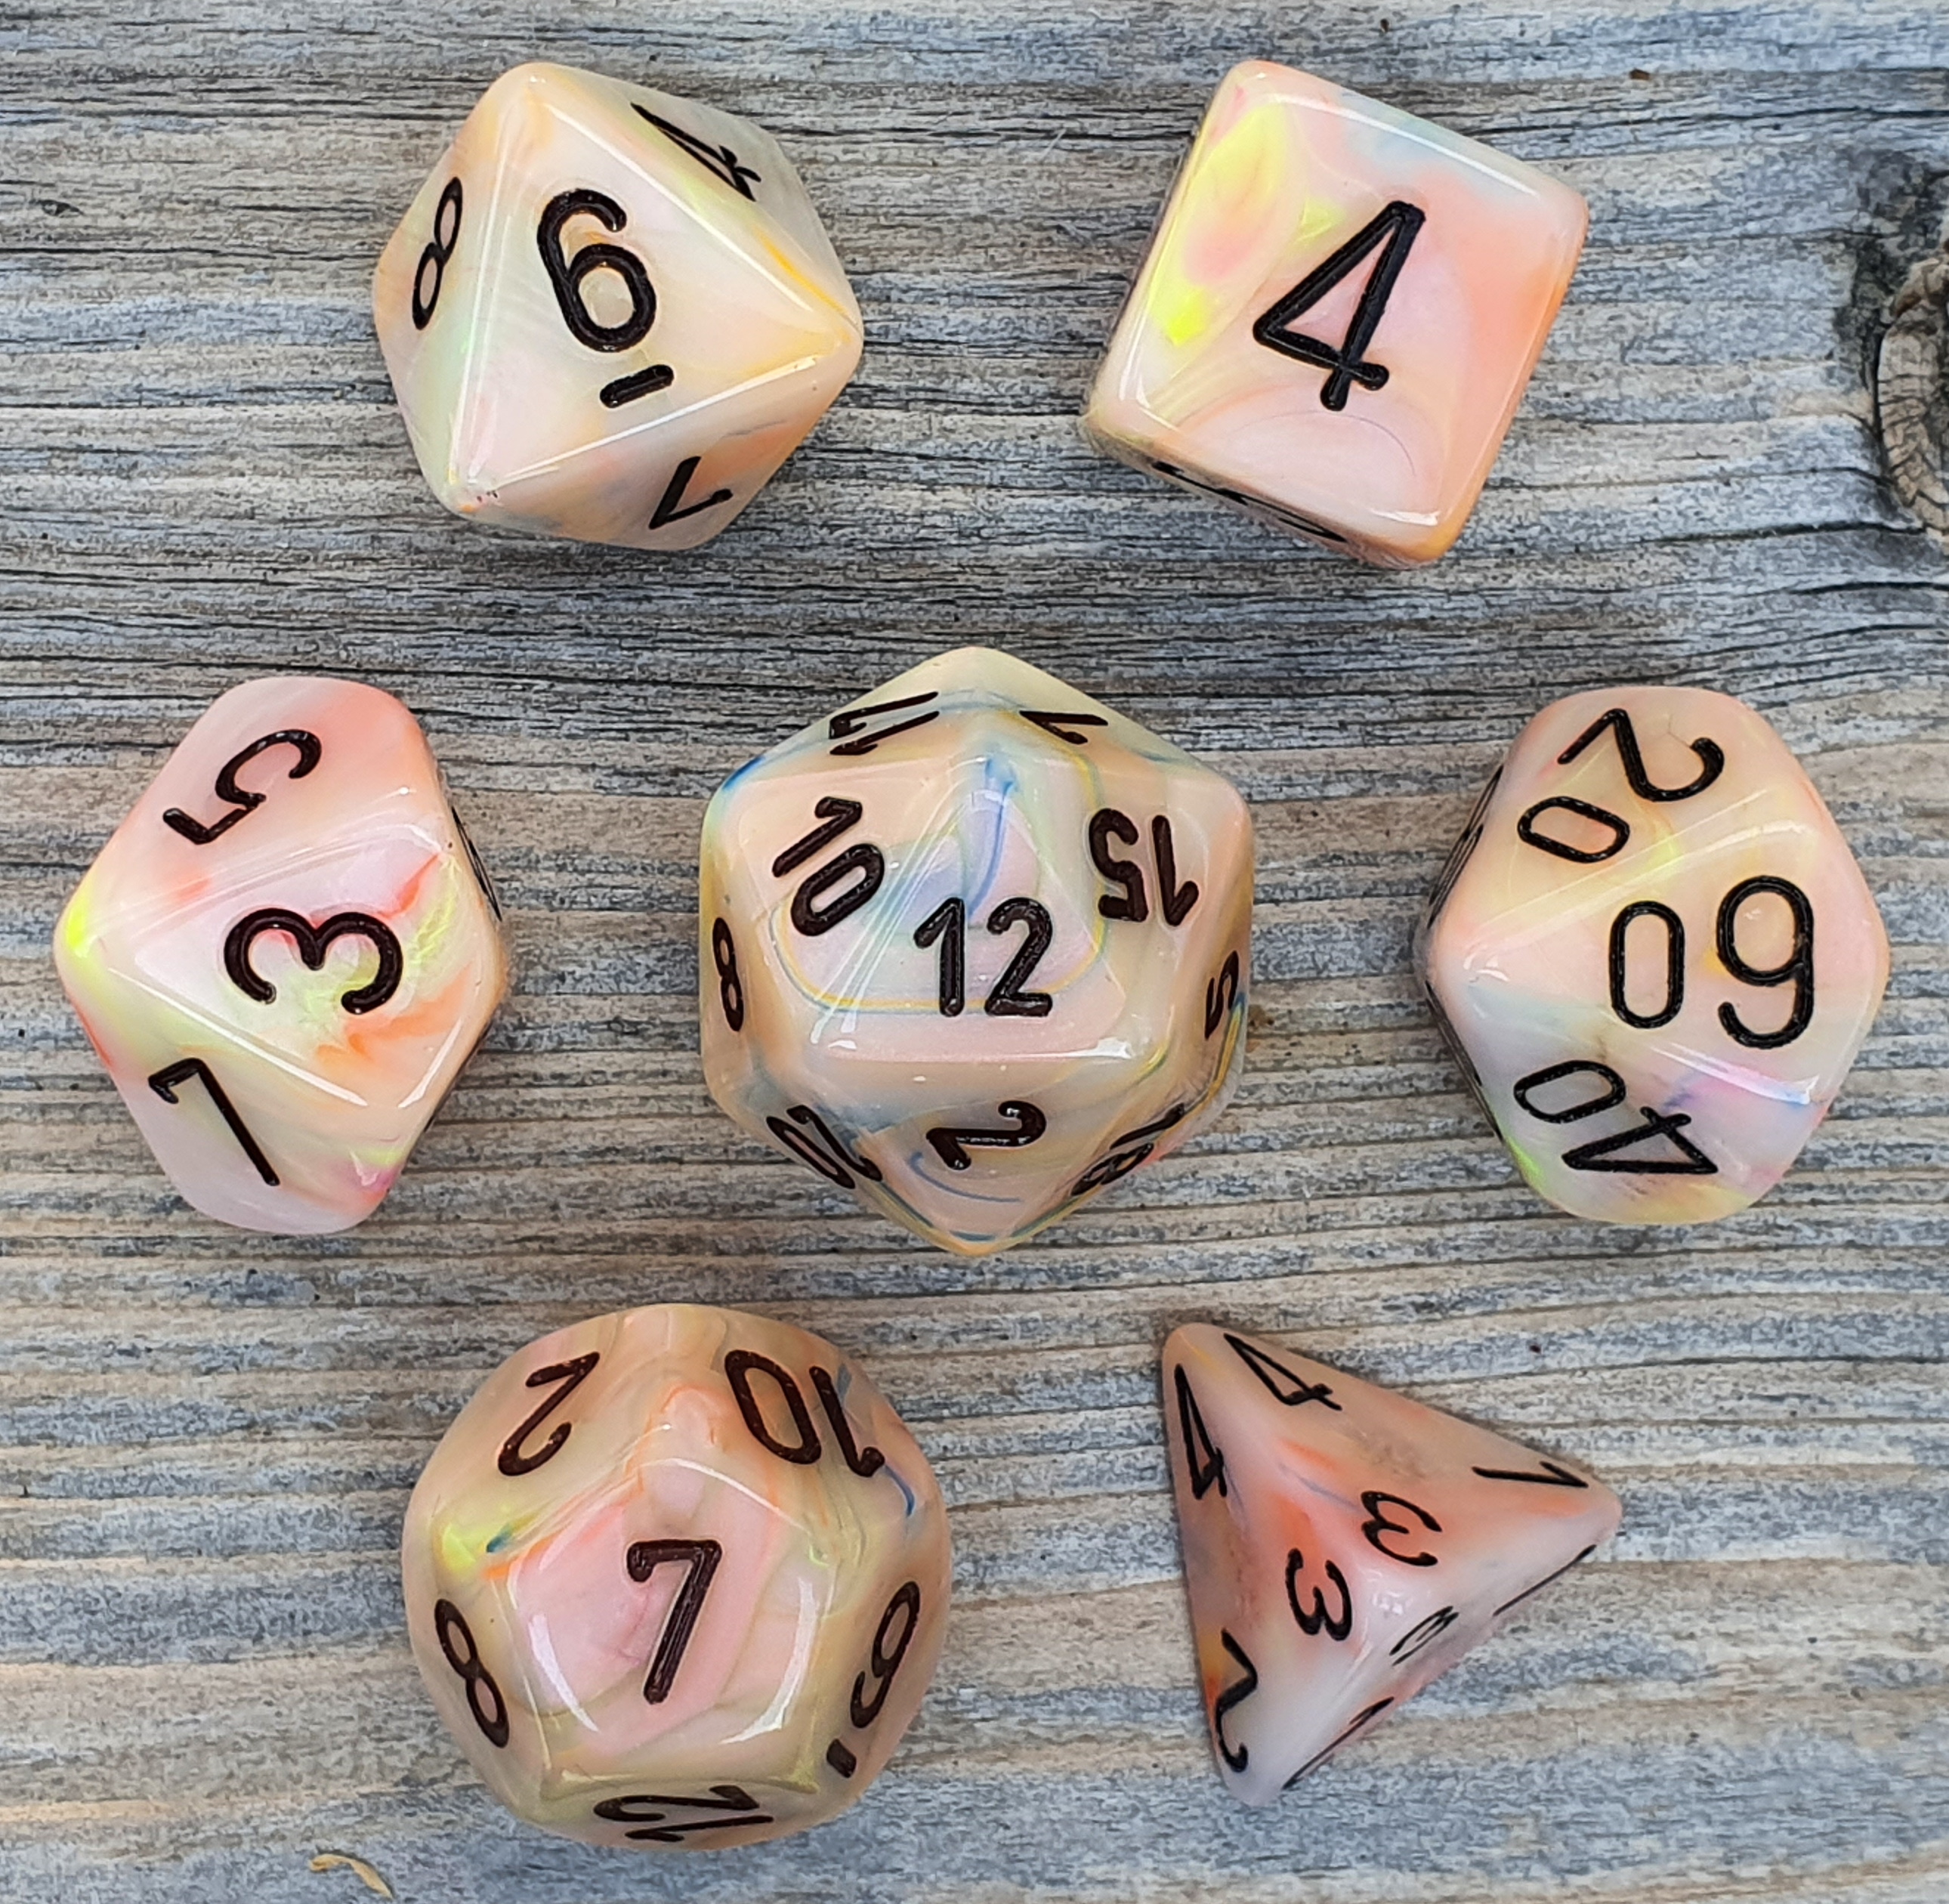 Dice 50mm Chessex Festive Vibrant w/Brown pips Fun Blend! 15% DISCOUNT! 